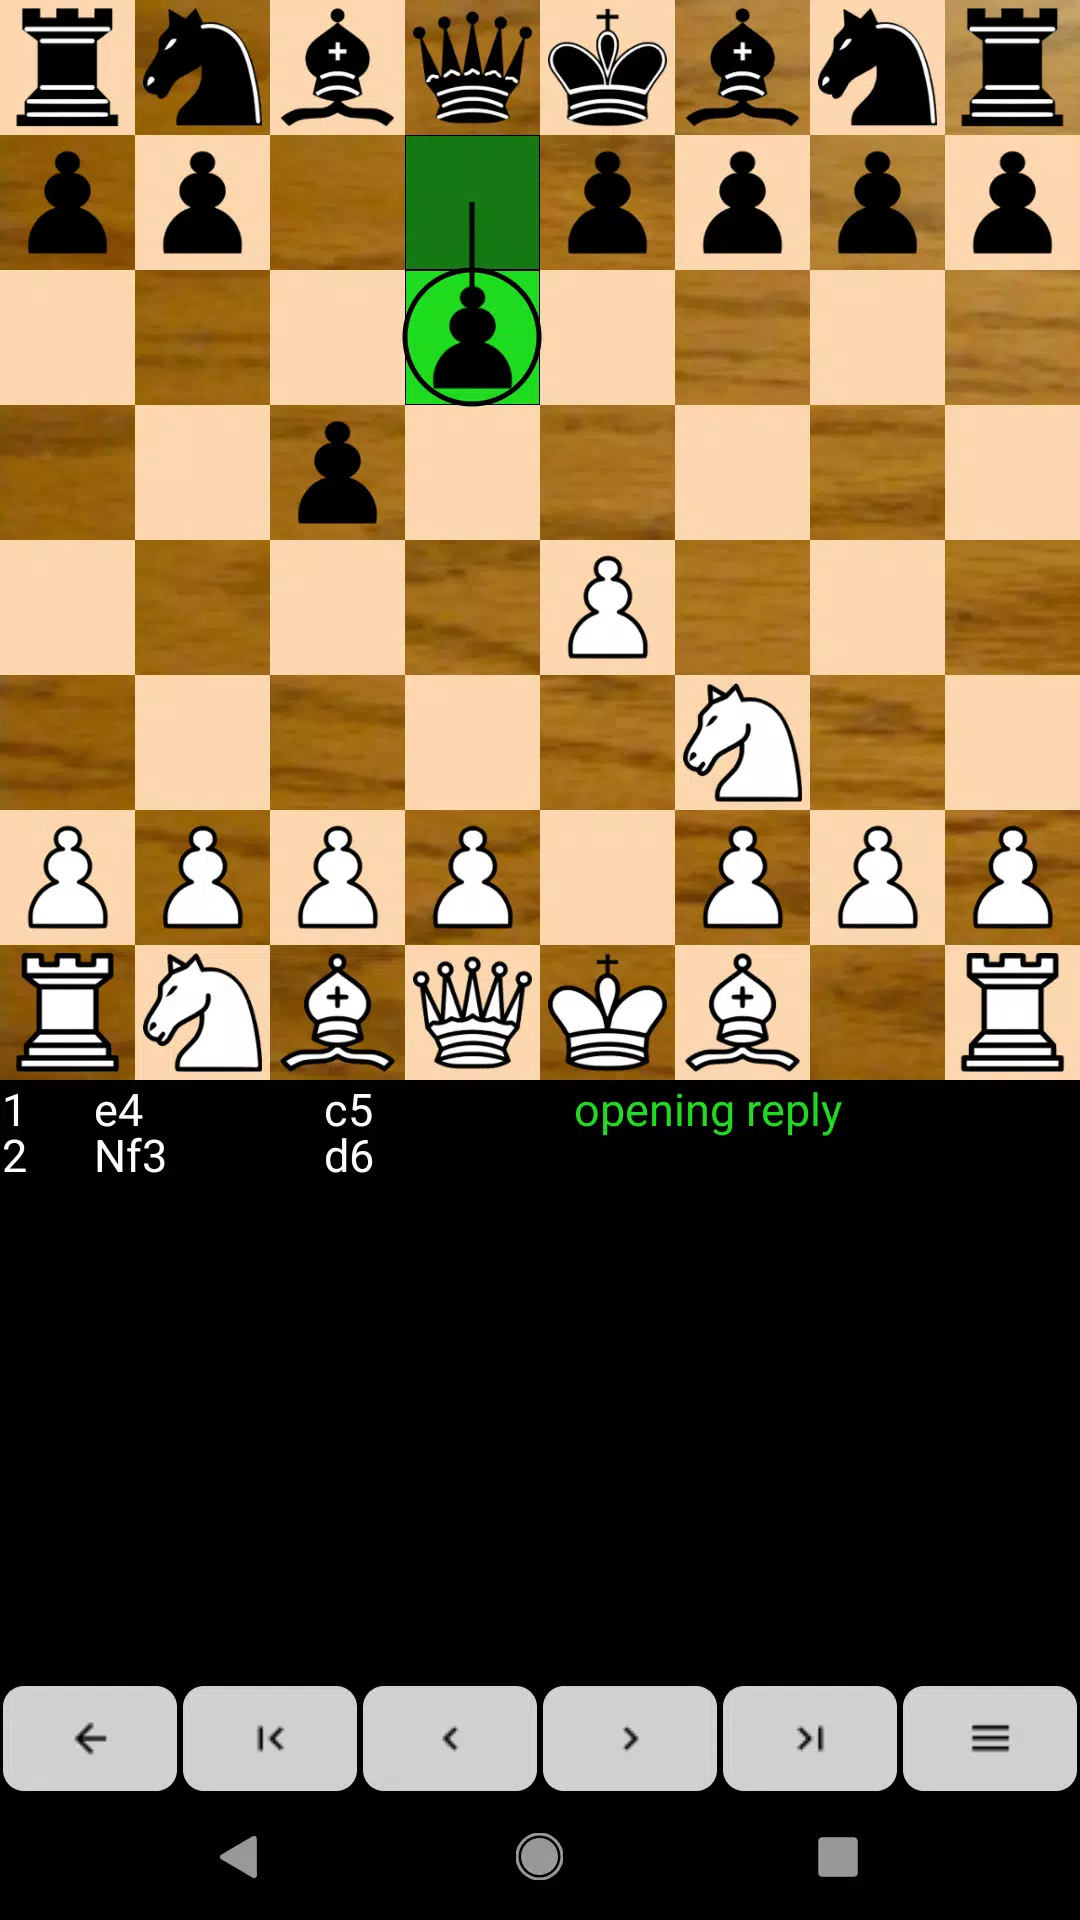 Baixar Chess Free 3.62 Android - Download APK Grátis